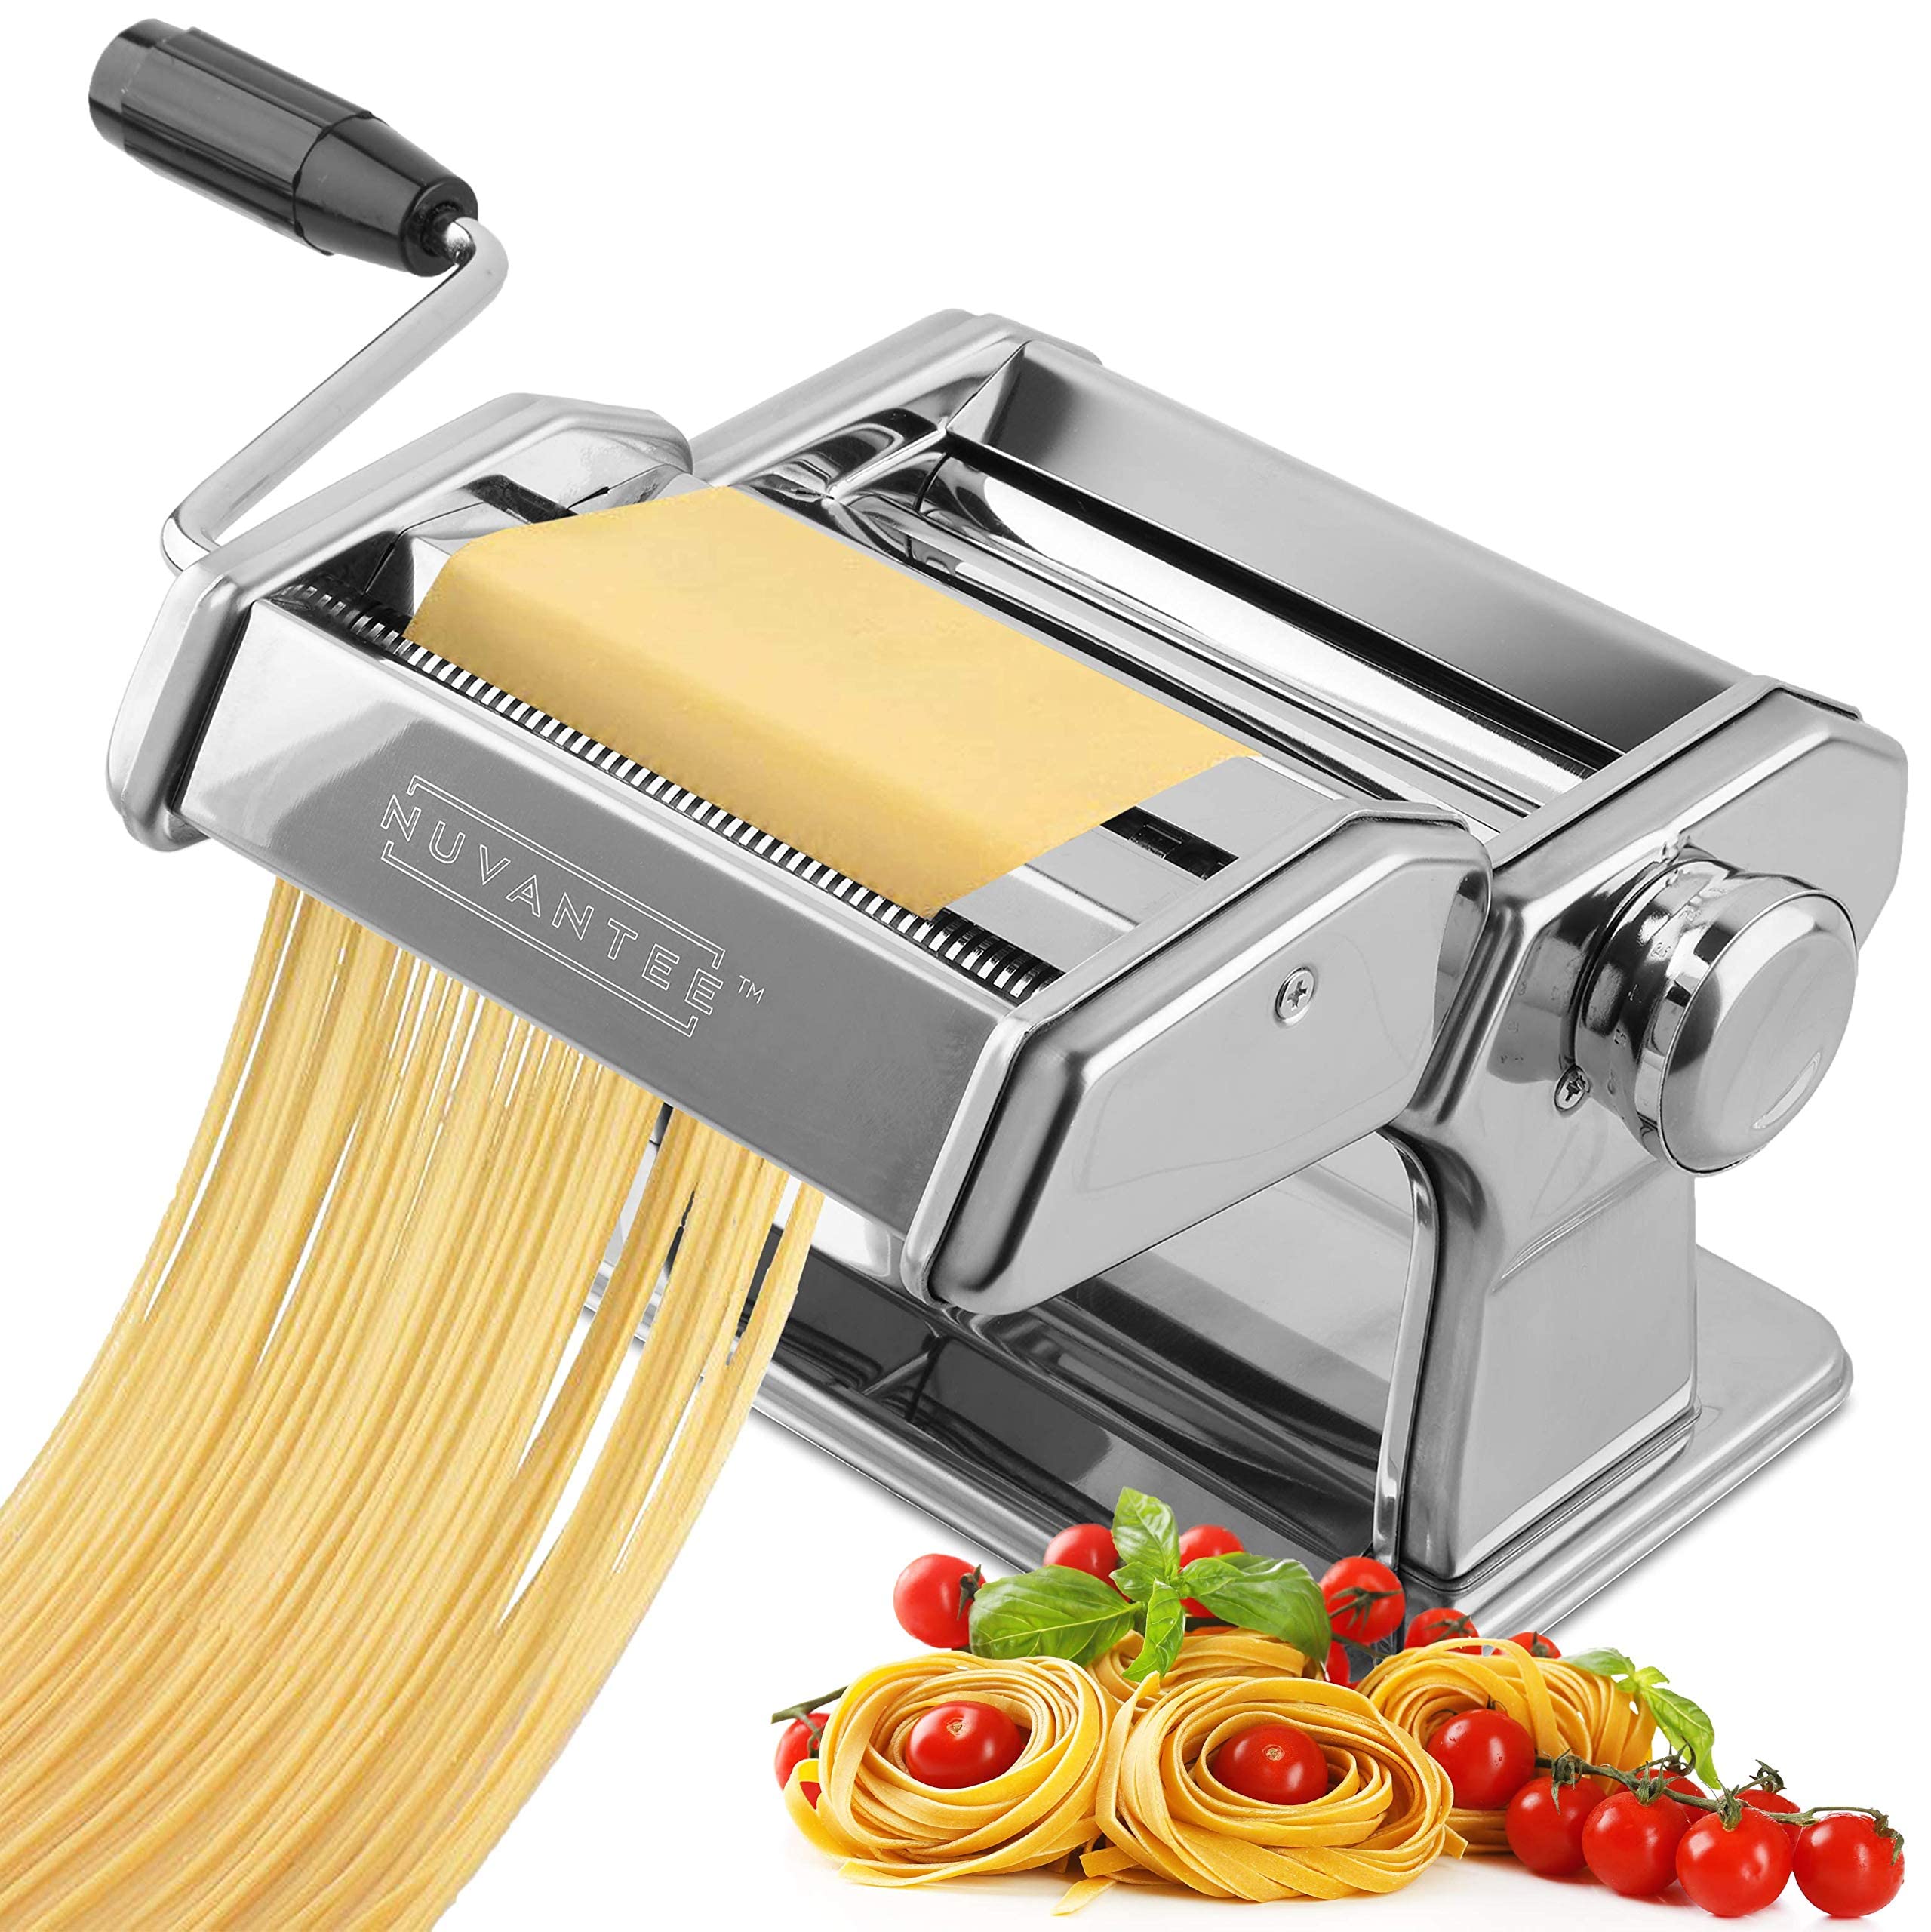 Nuvantee Pasta Maker Machine,Manual Hand Press,Adjustable Thickness Settings,Noodles Maker with Washable Aluminum Alloy Rollers and Cutter $15